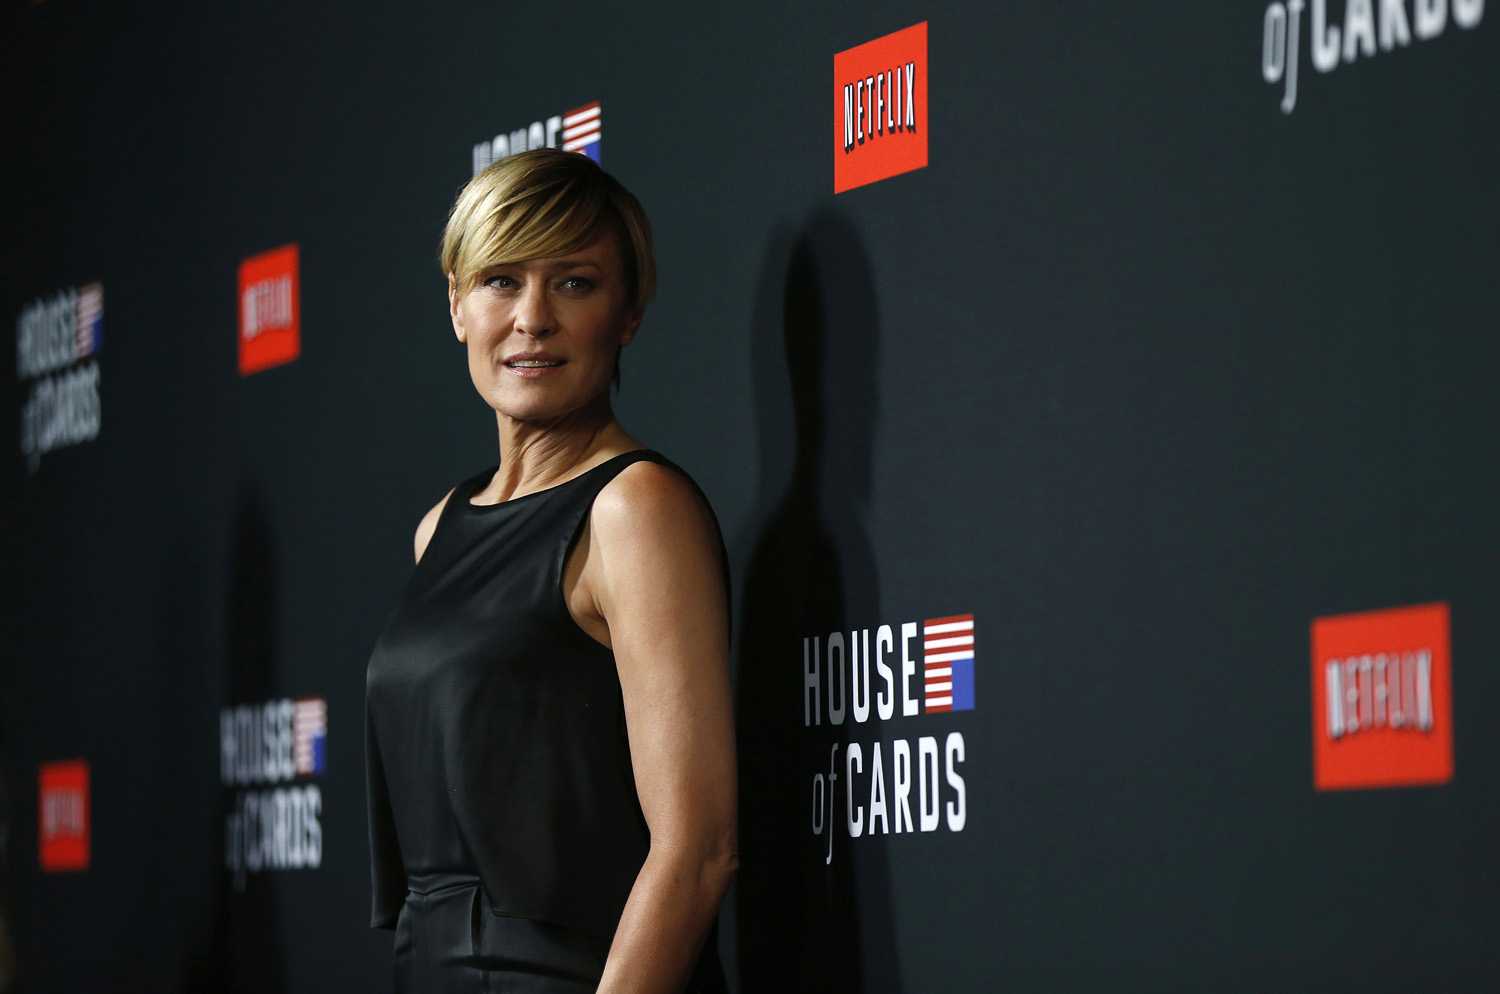 Cast member Robin Wright poses at the premiere for the second season of the television series "House of Cards" at the Directors Guild of America in Los Angeles, California February 13, 2014. Season 2 premieres on Netflix on February 14.